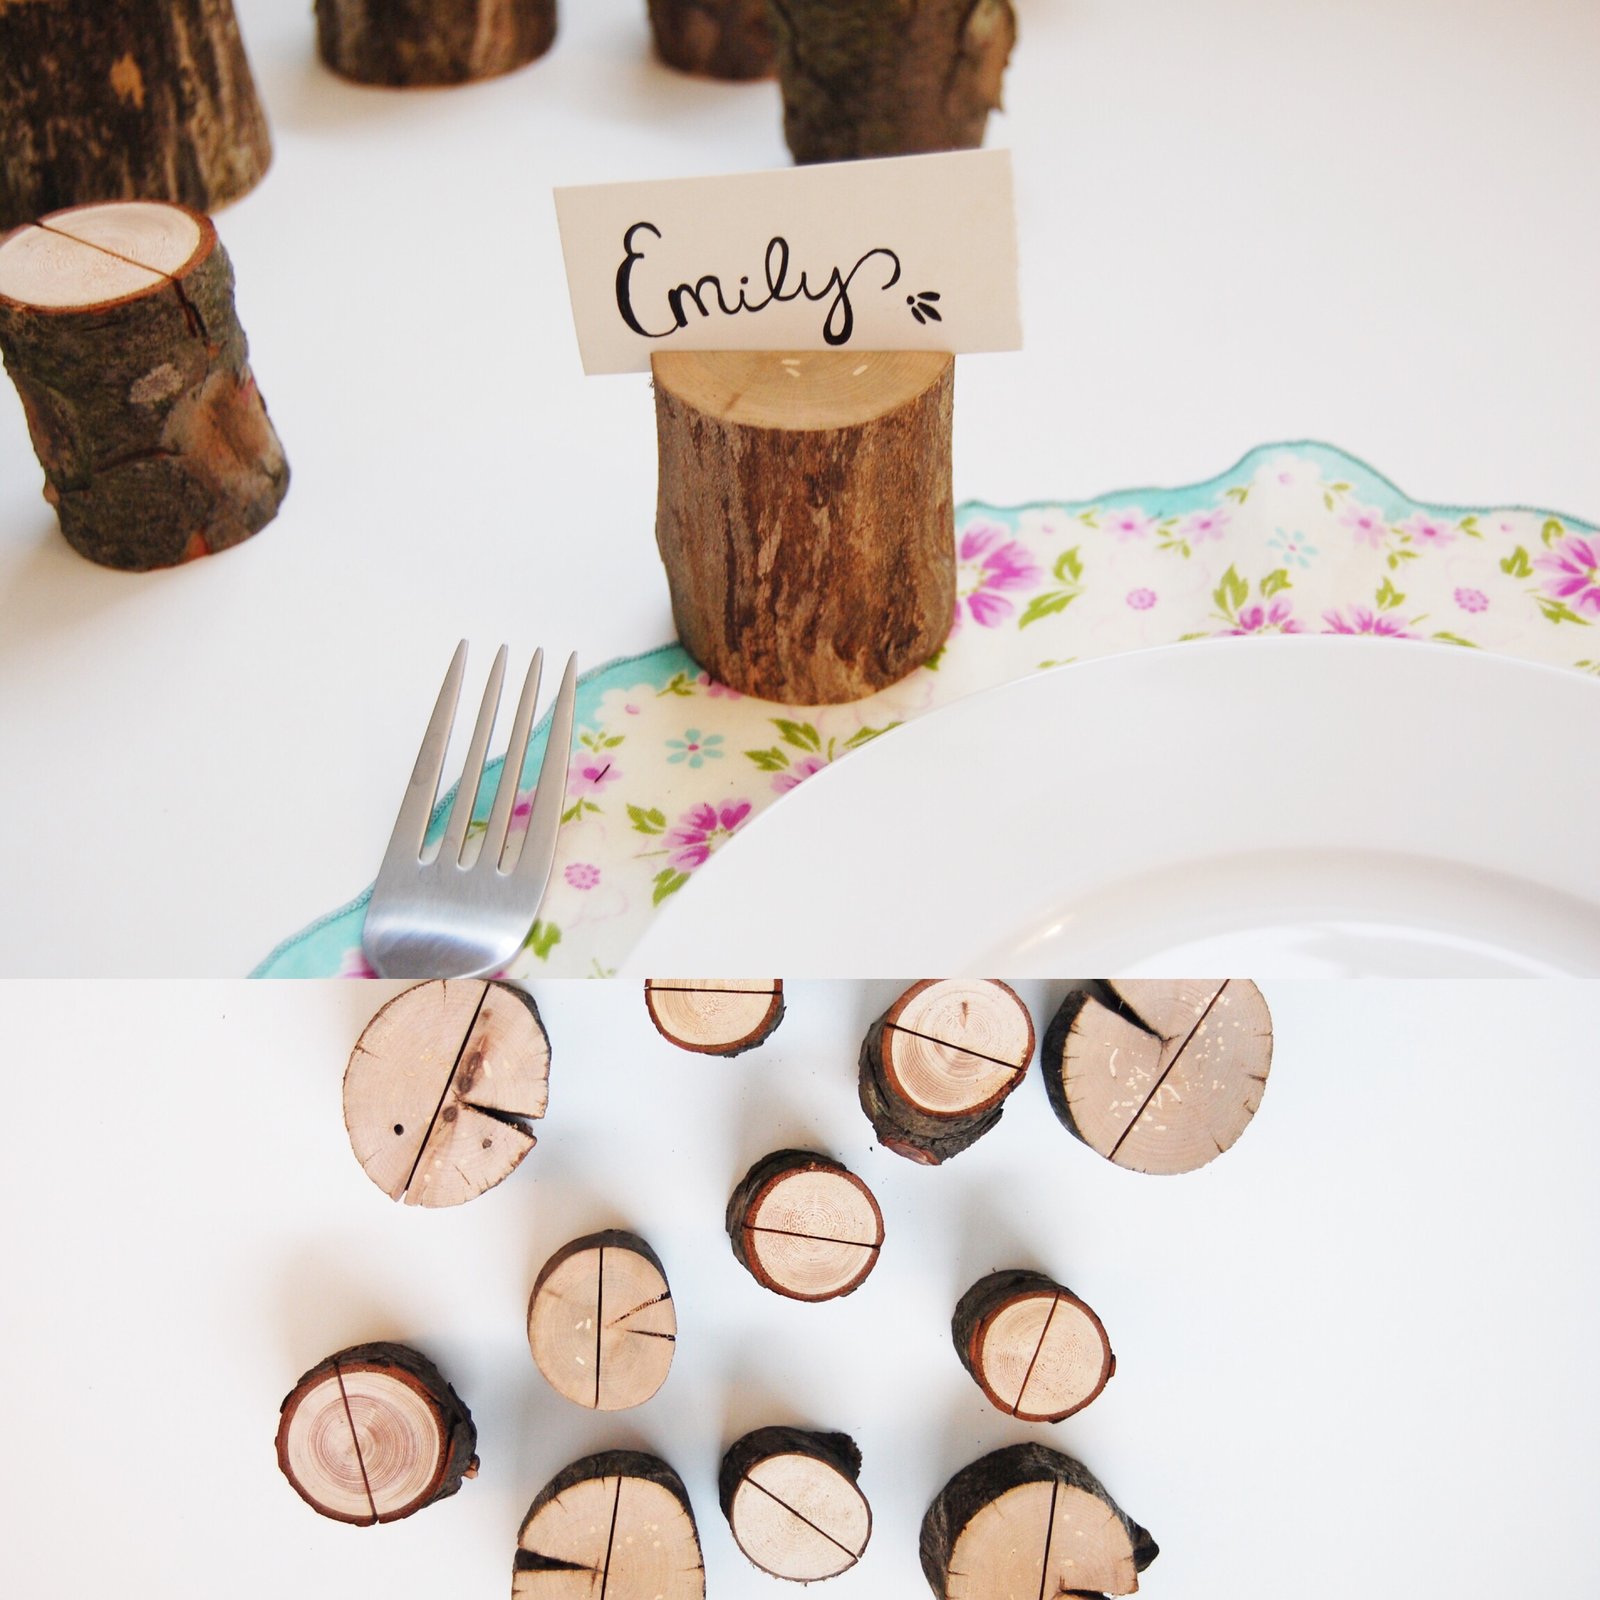 wood place card holders